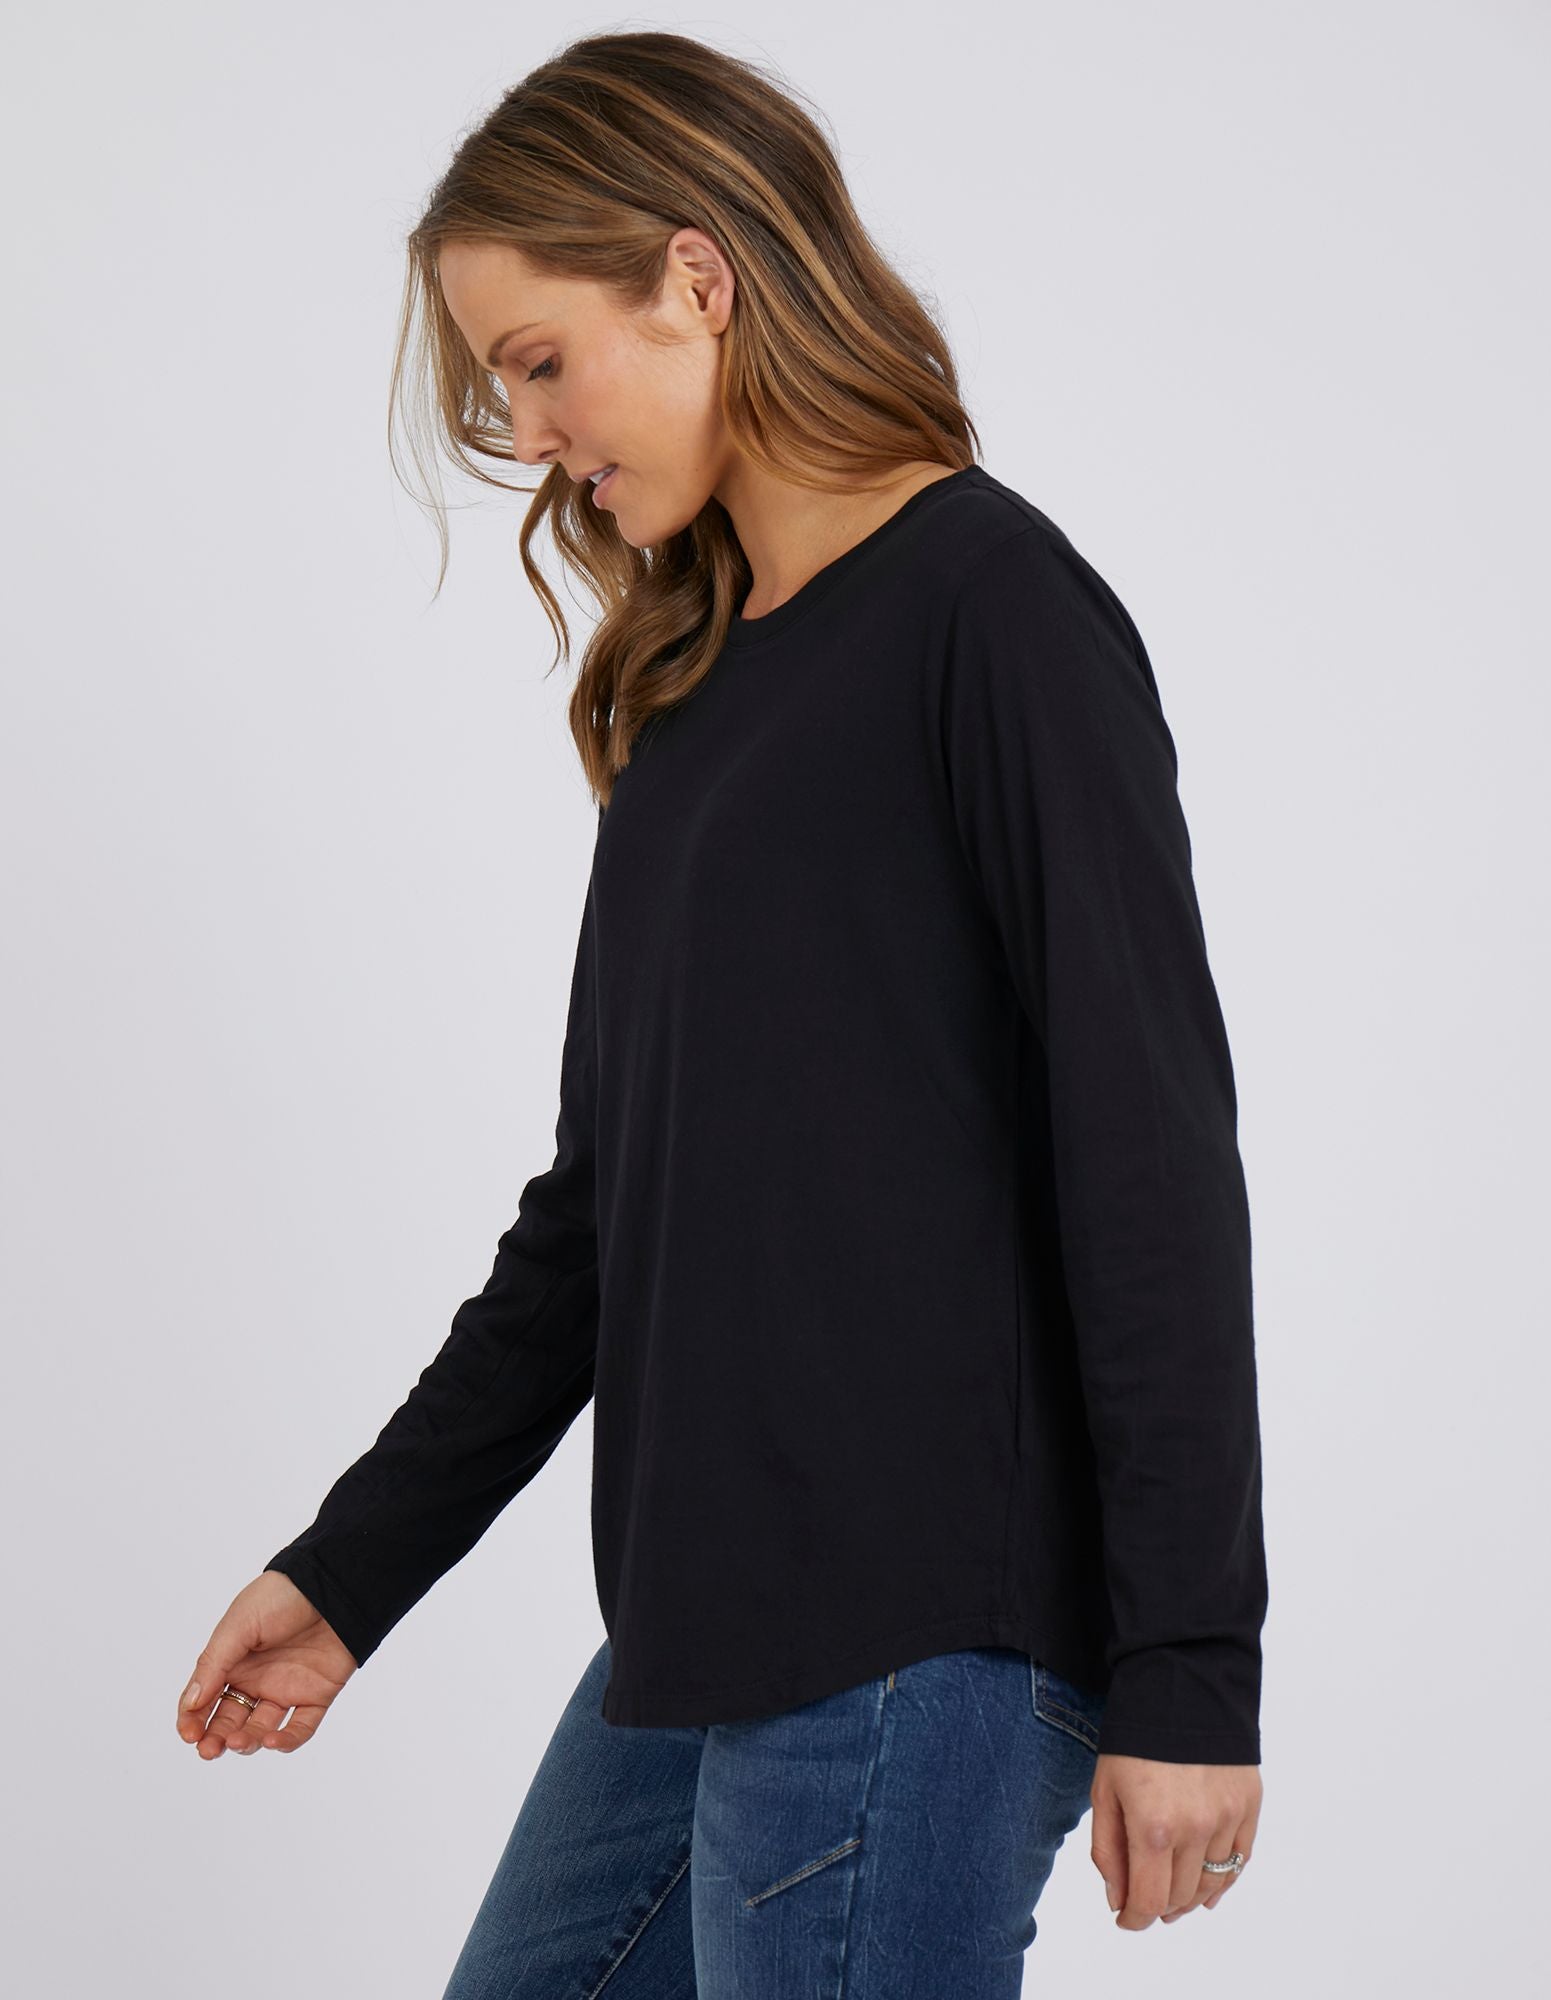 Manly Long Sleeve Tee - Black - Foxwood - FUDGE Gifts Home Lifestyle